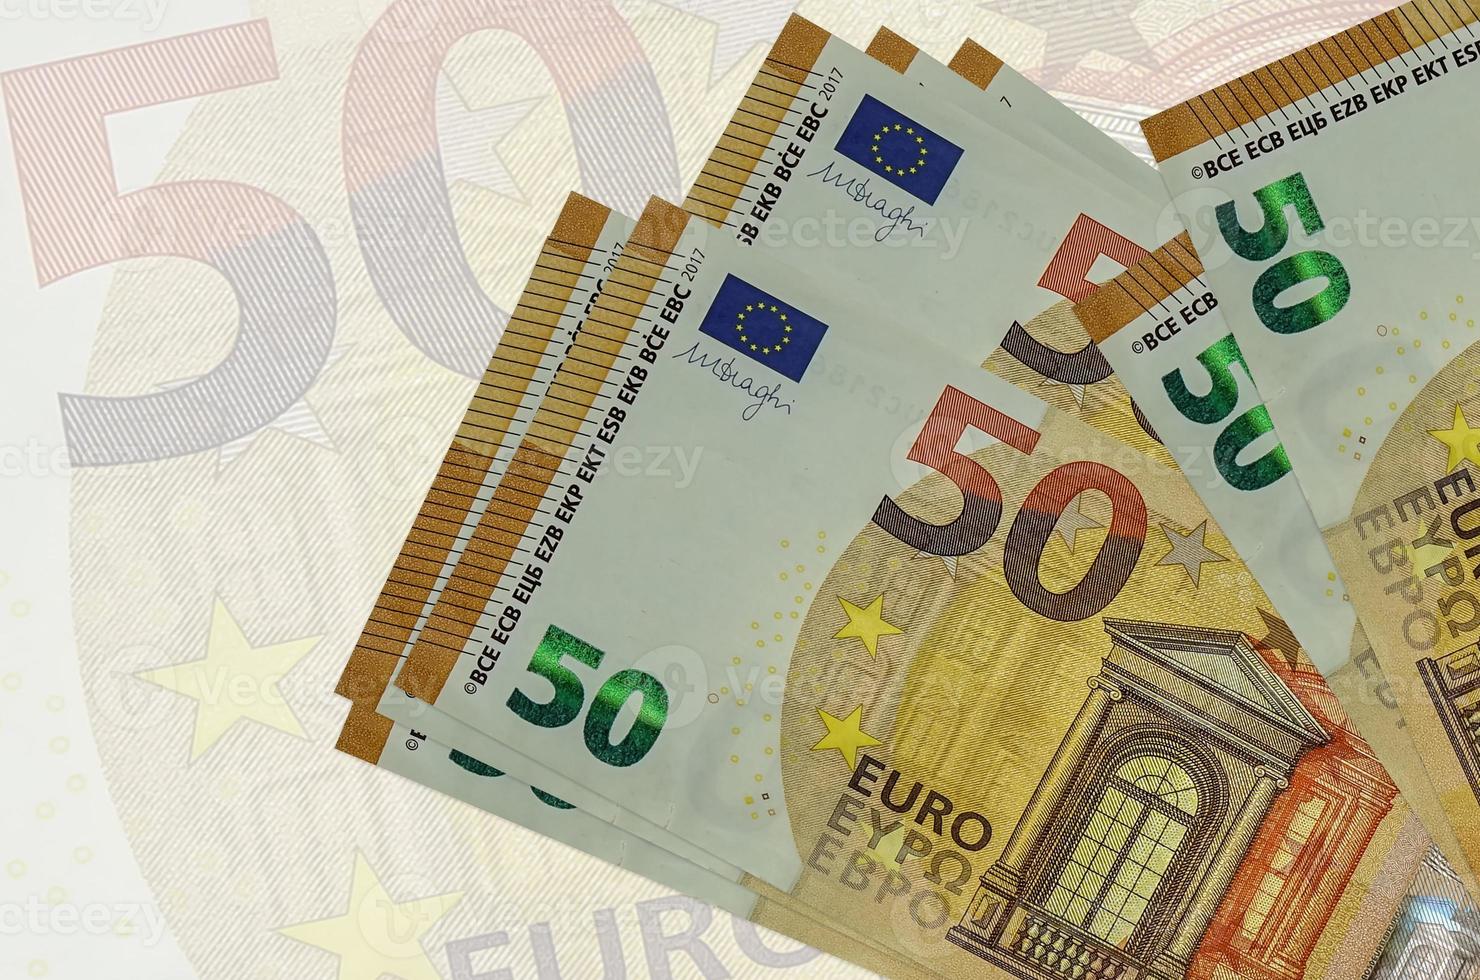 50 euro bills lies in stack on background of big semi-transparent banknote. Abstract presentation of national currency photo